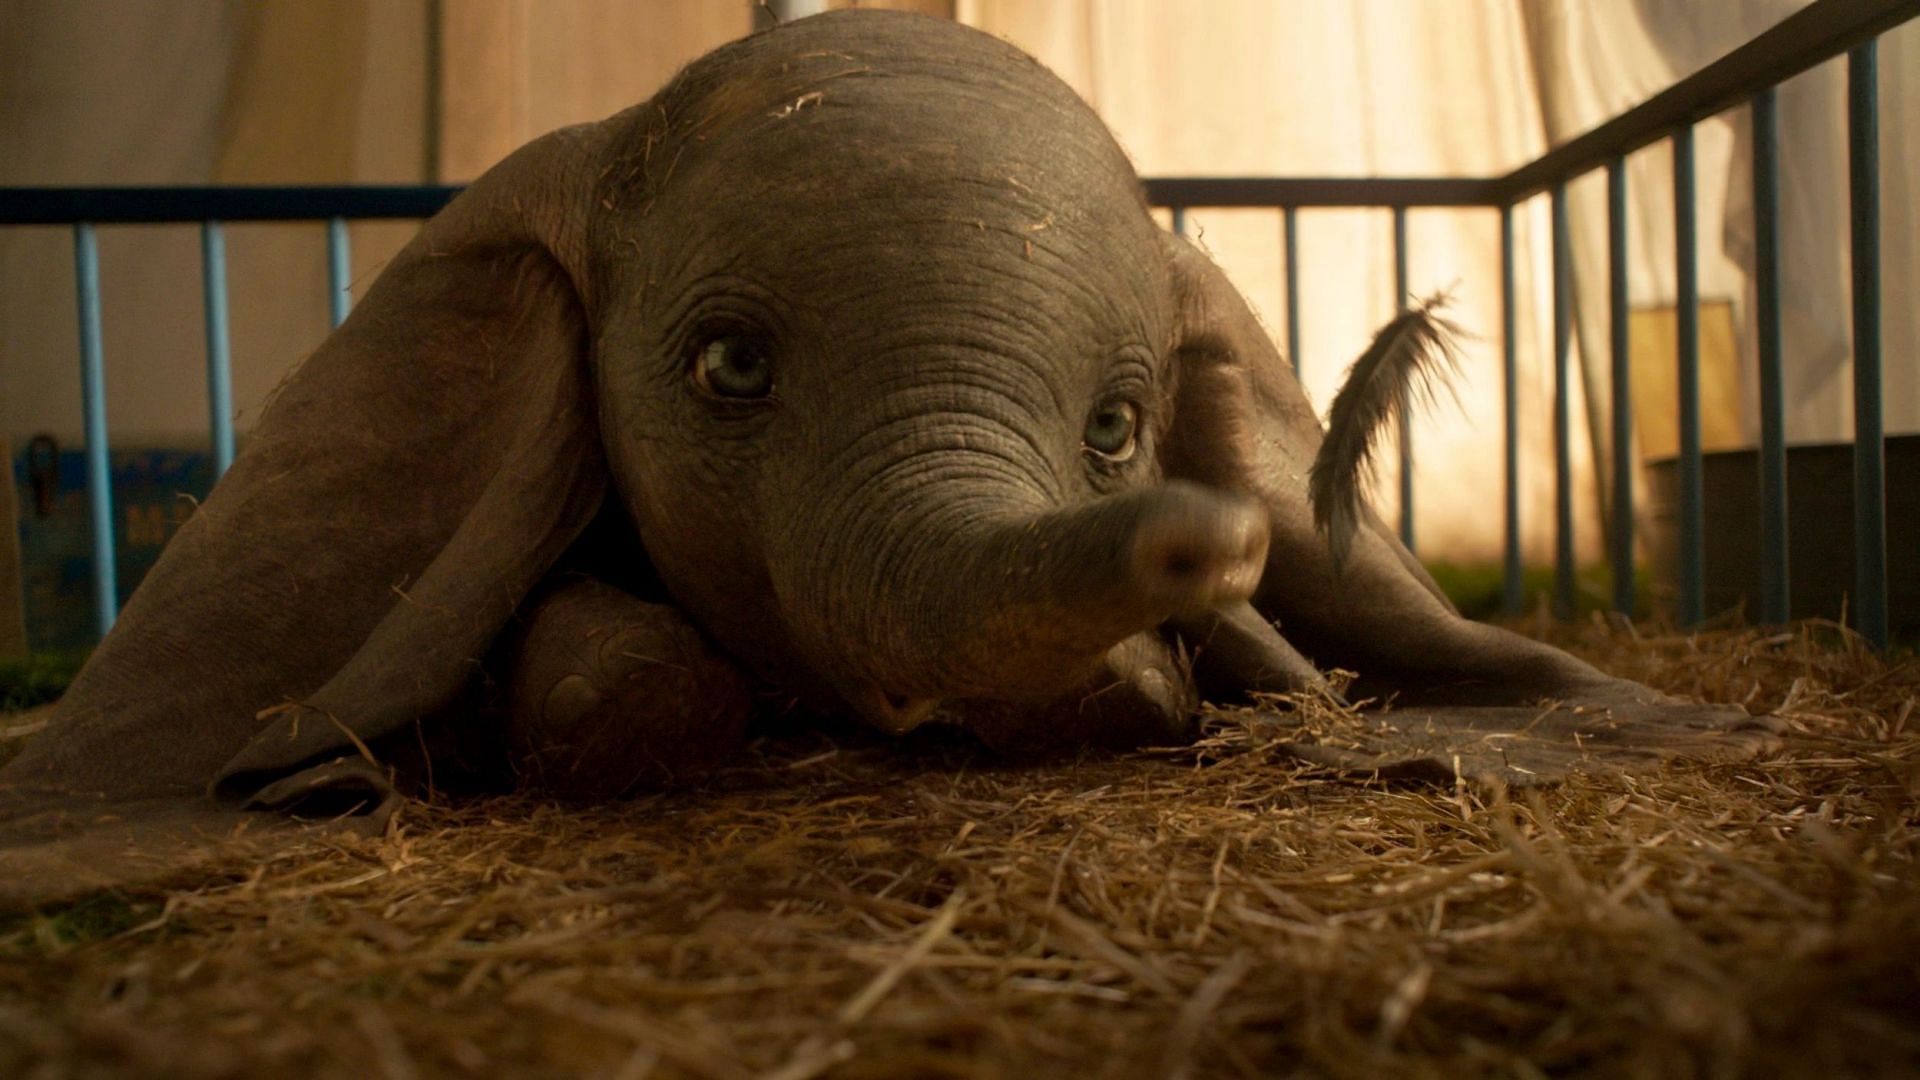 Dumbo as he appears in the live-action film (Image via Disney)